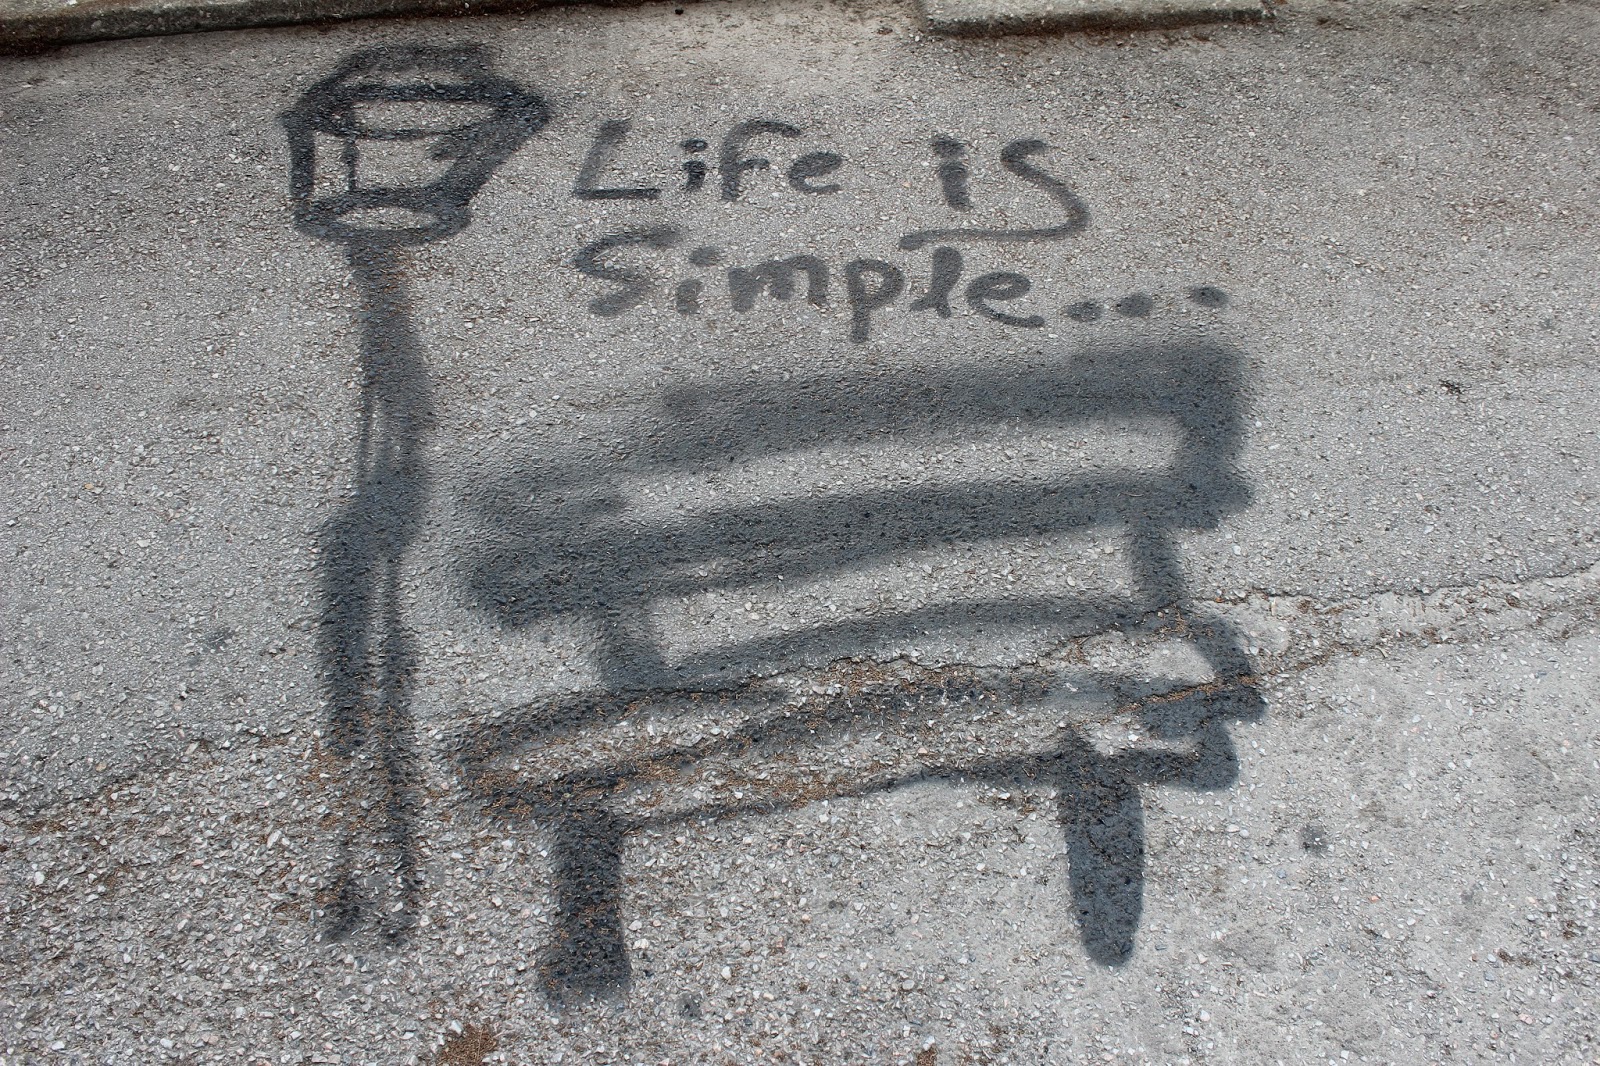 life is ismple